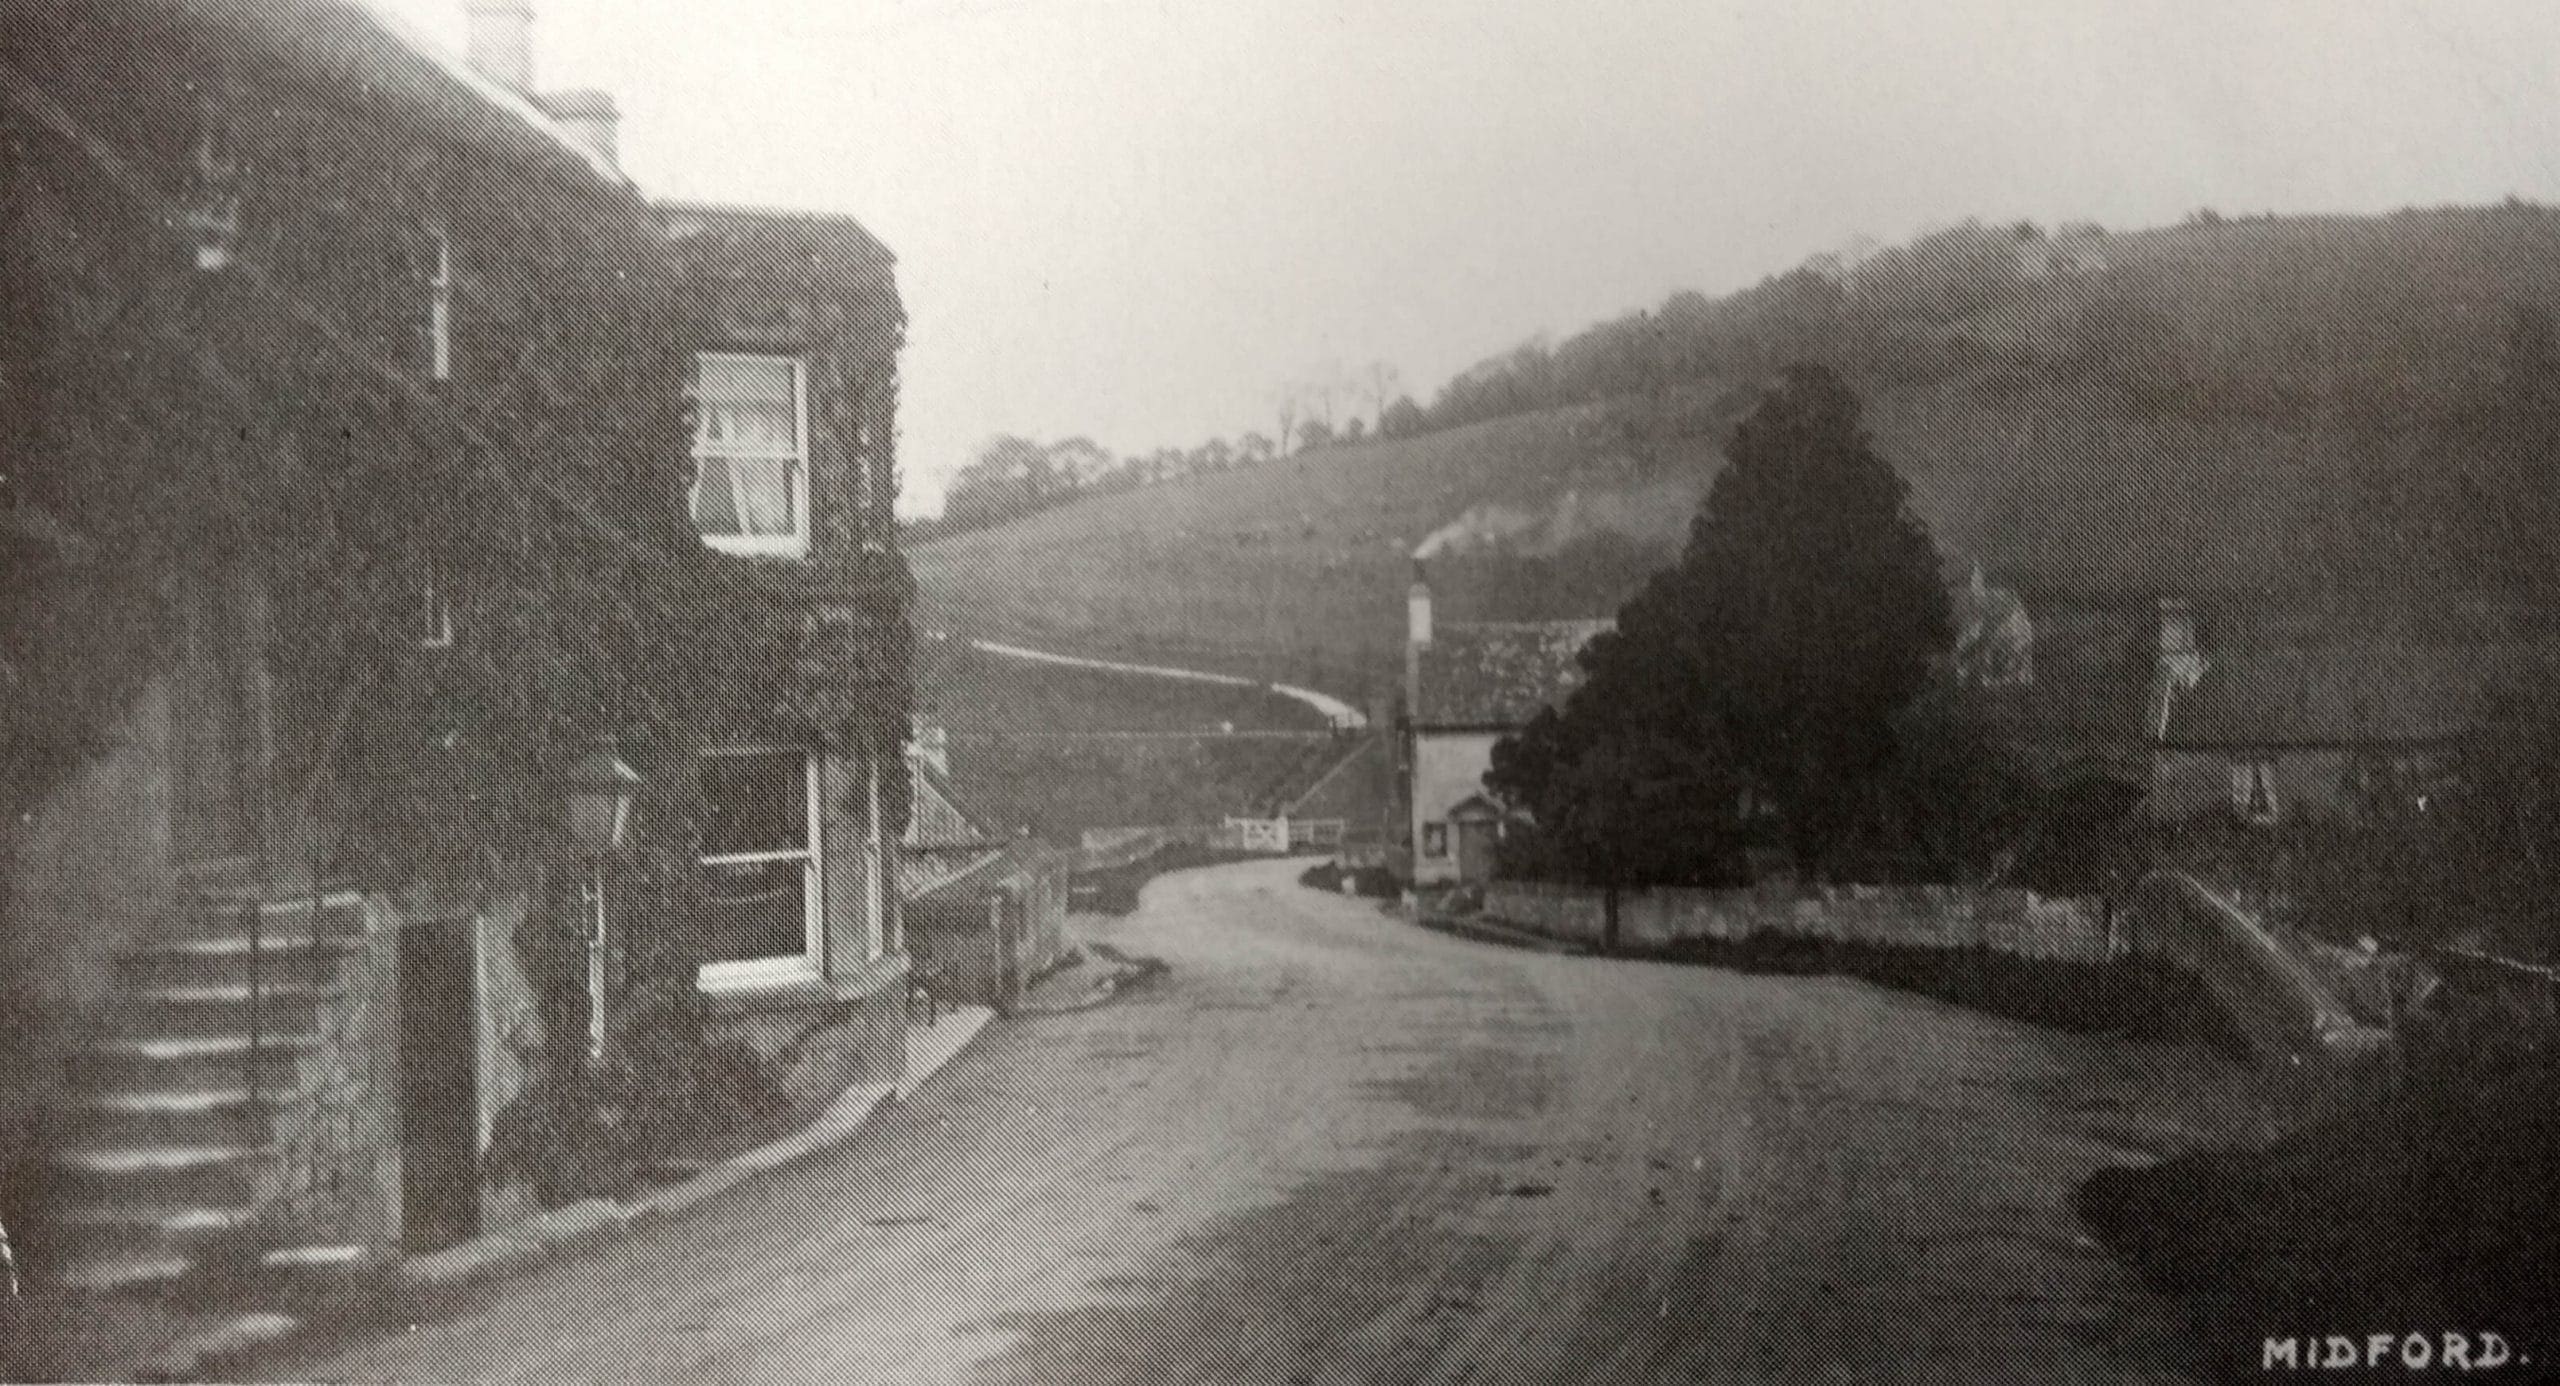 Midford early 1900s